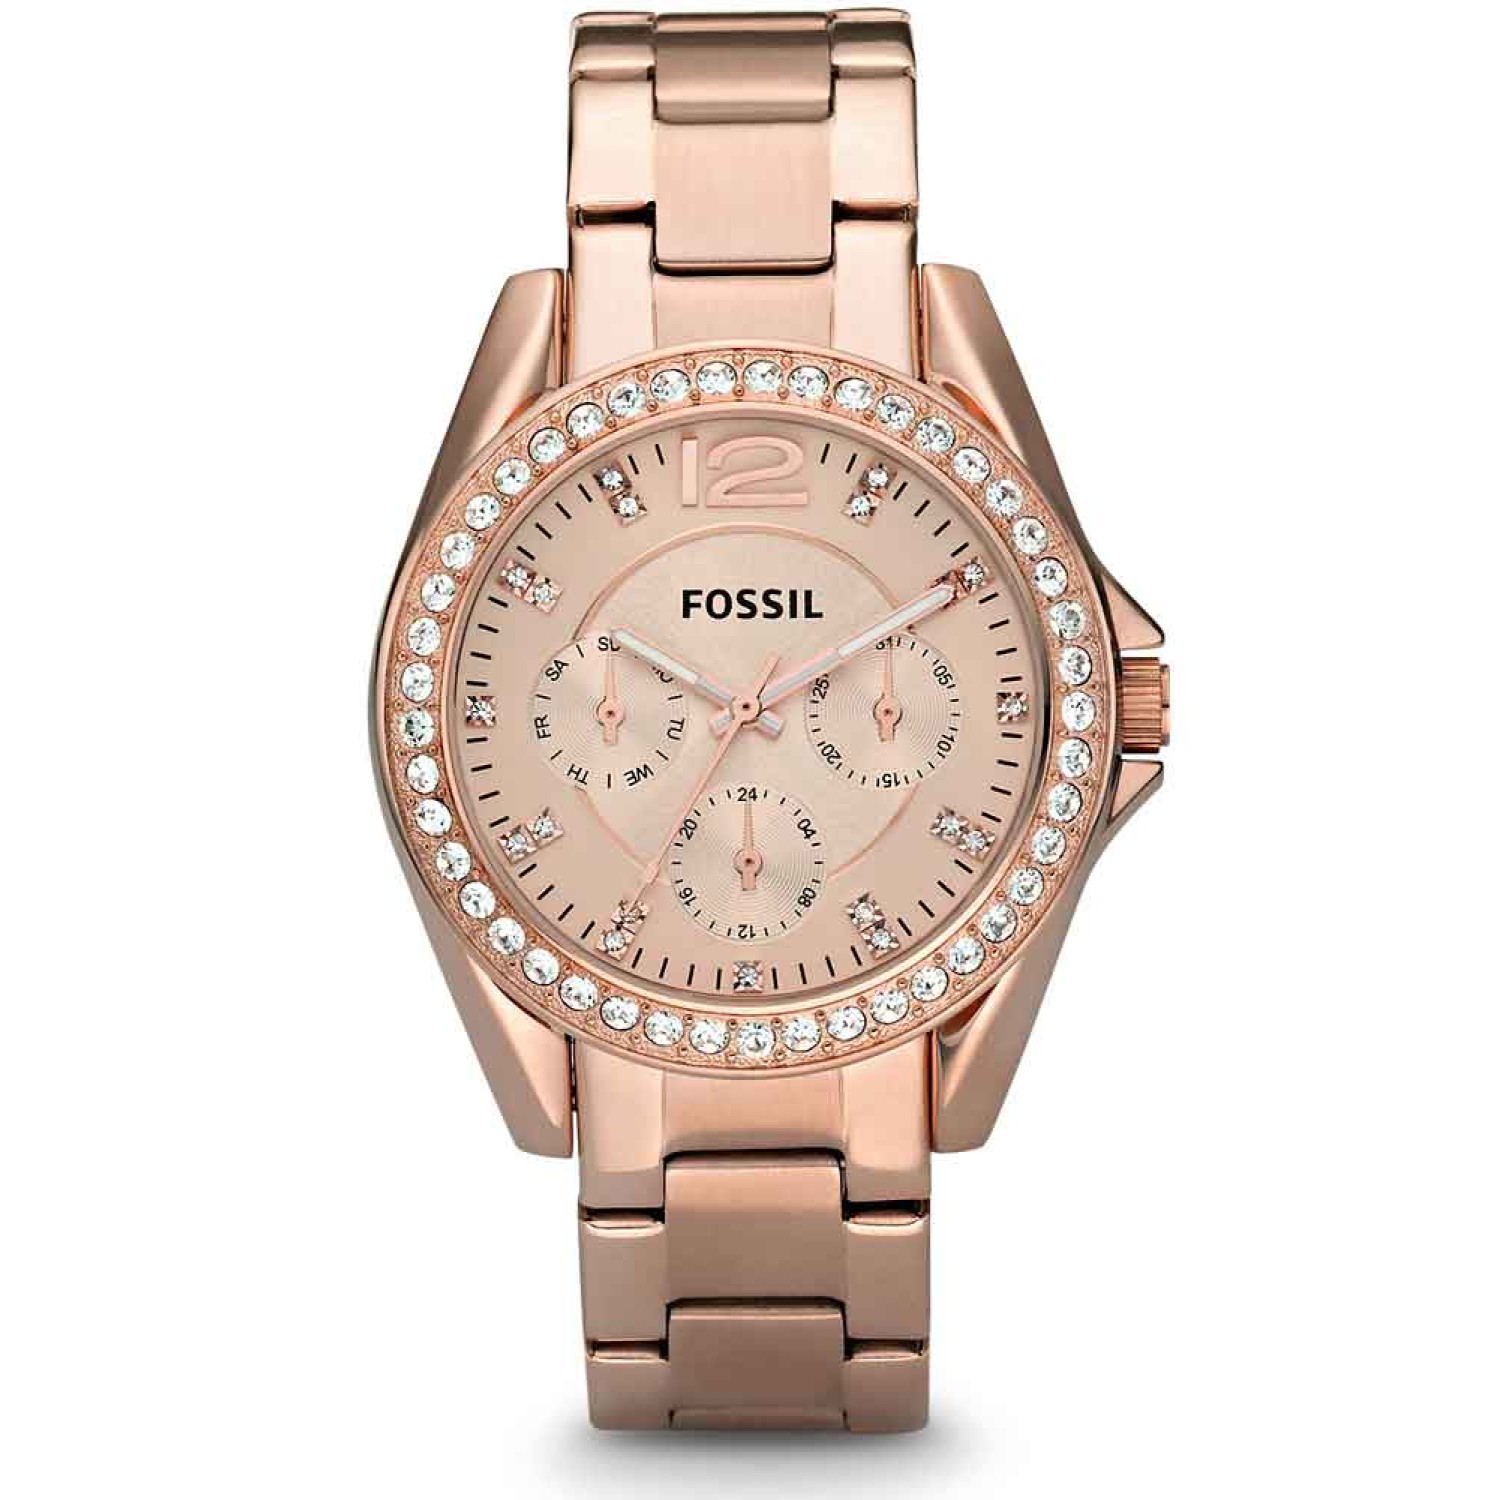 ES2811 Fossil Riley Multifunction Rose-Tone  Watch fossil smart watches nz